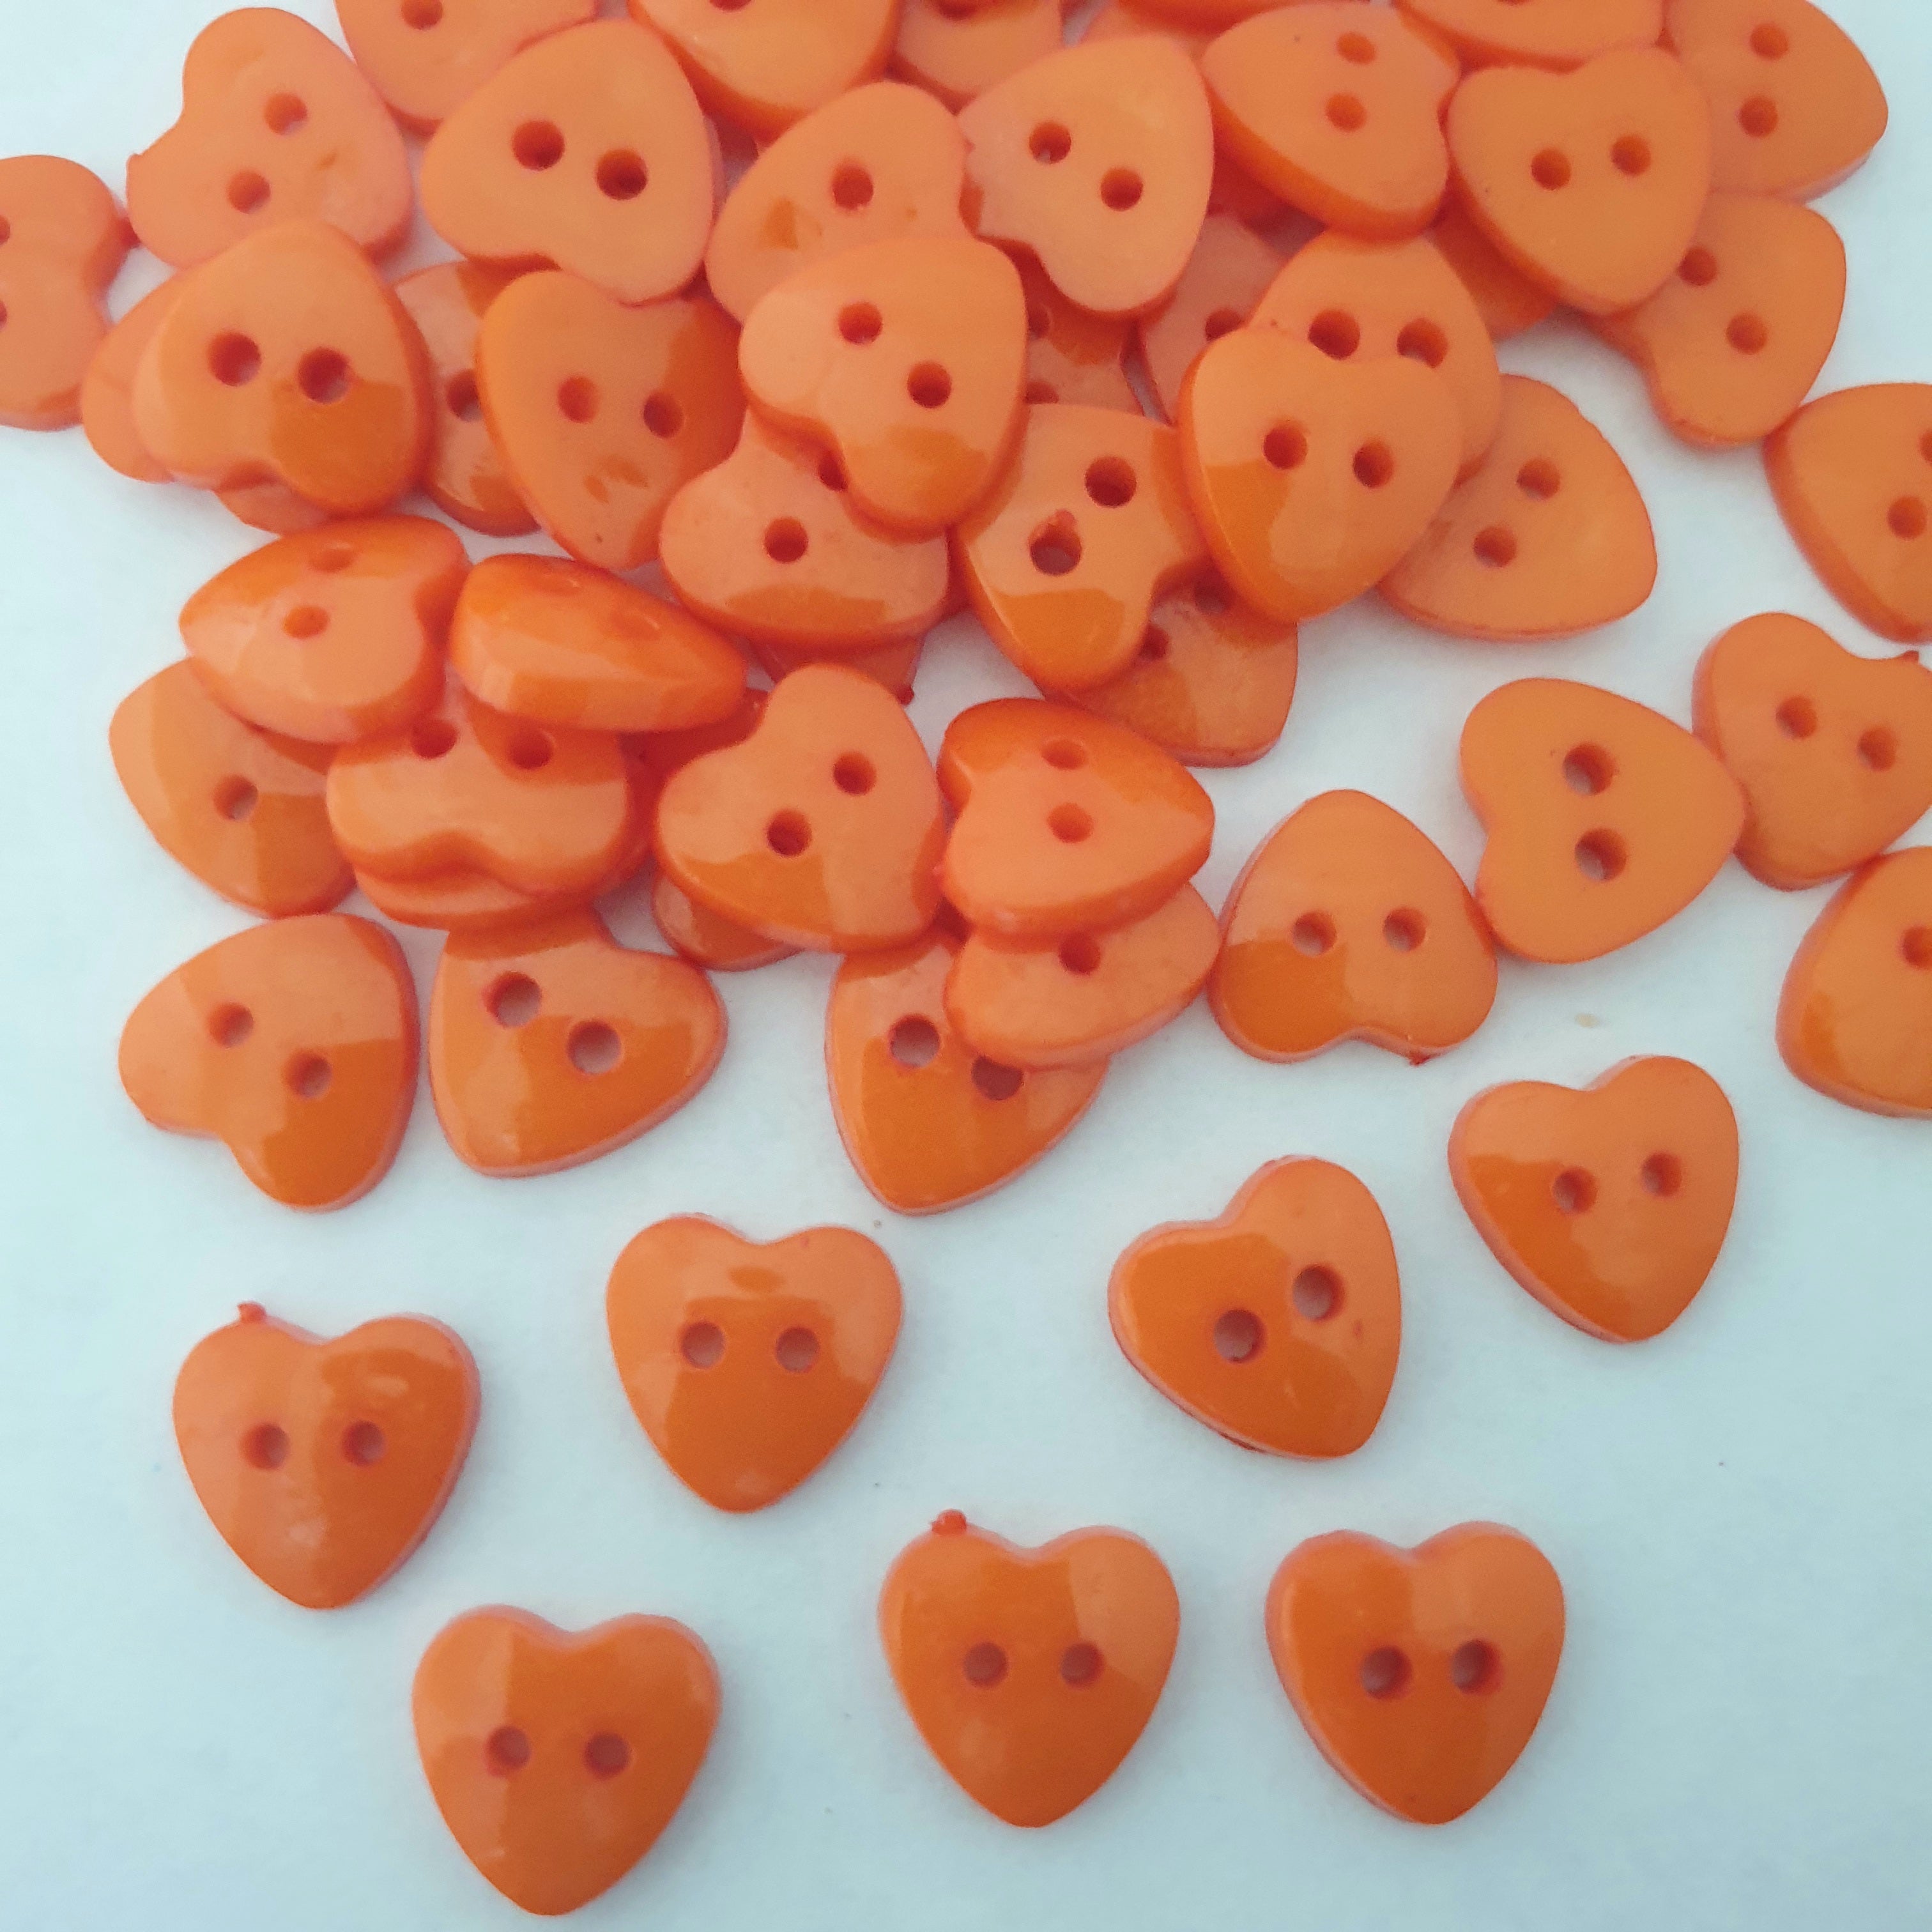 MajorCrafts 60pcs 13mm Orange Heart Shaped 2 Holes Resin Sewing Buttons